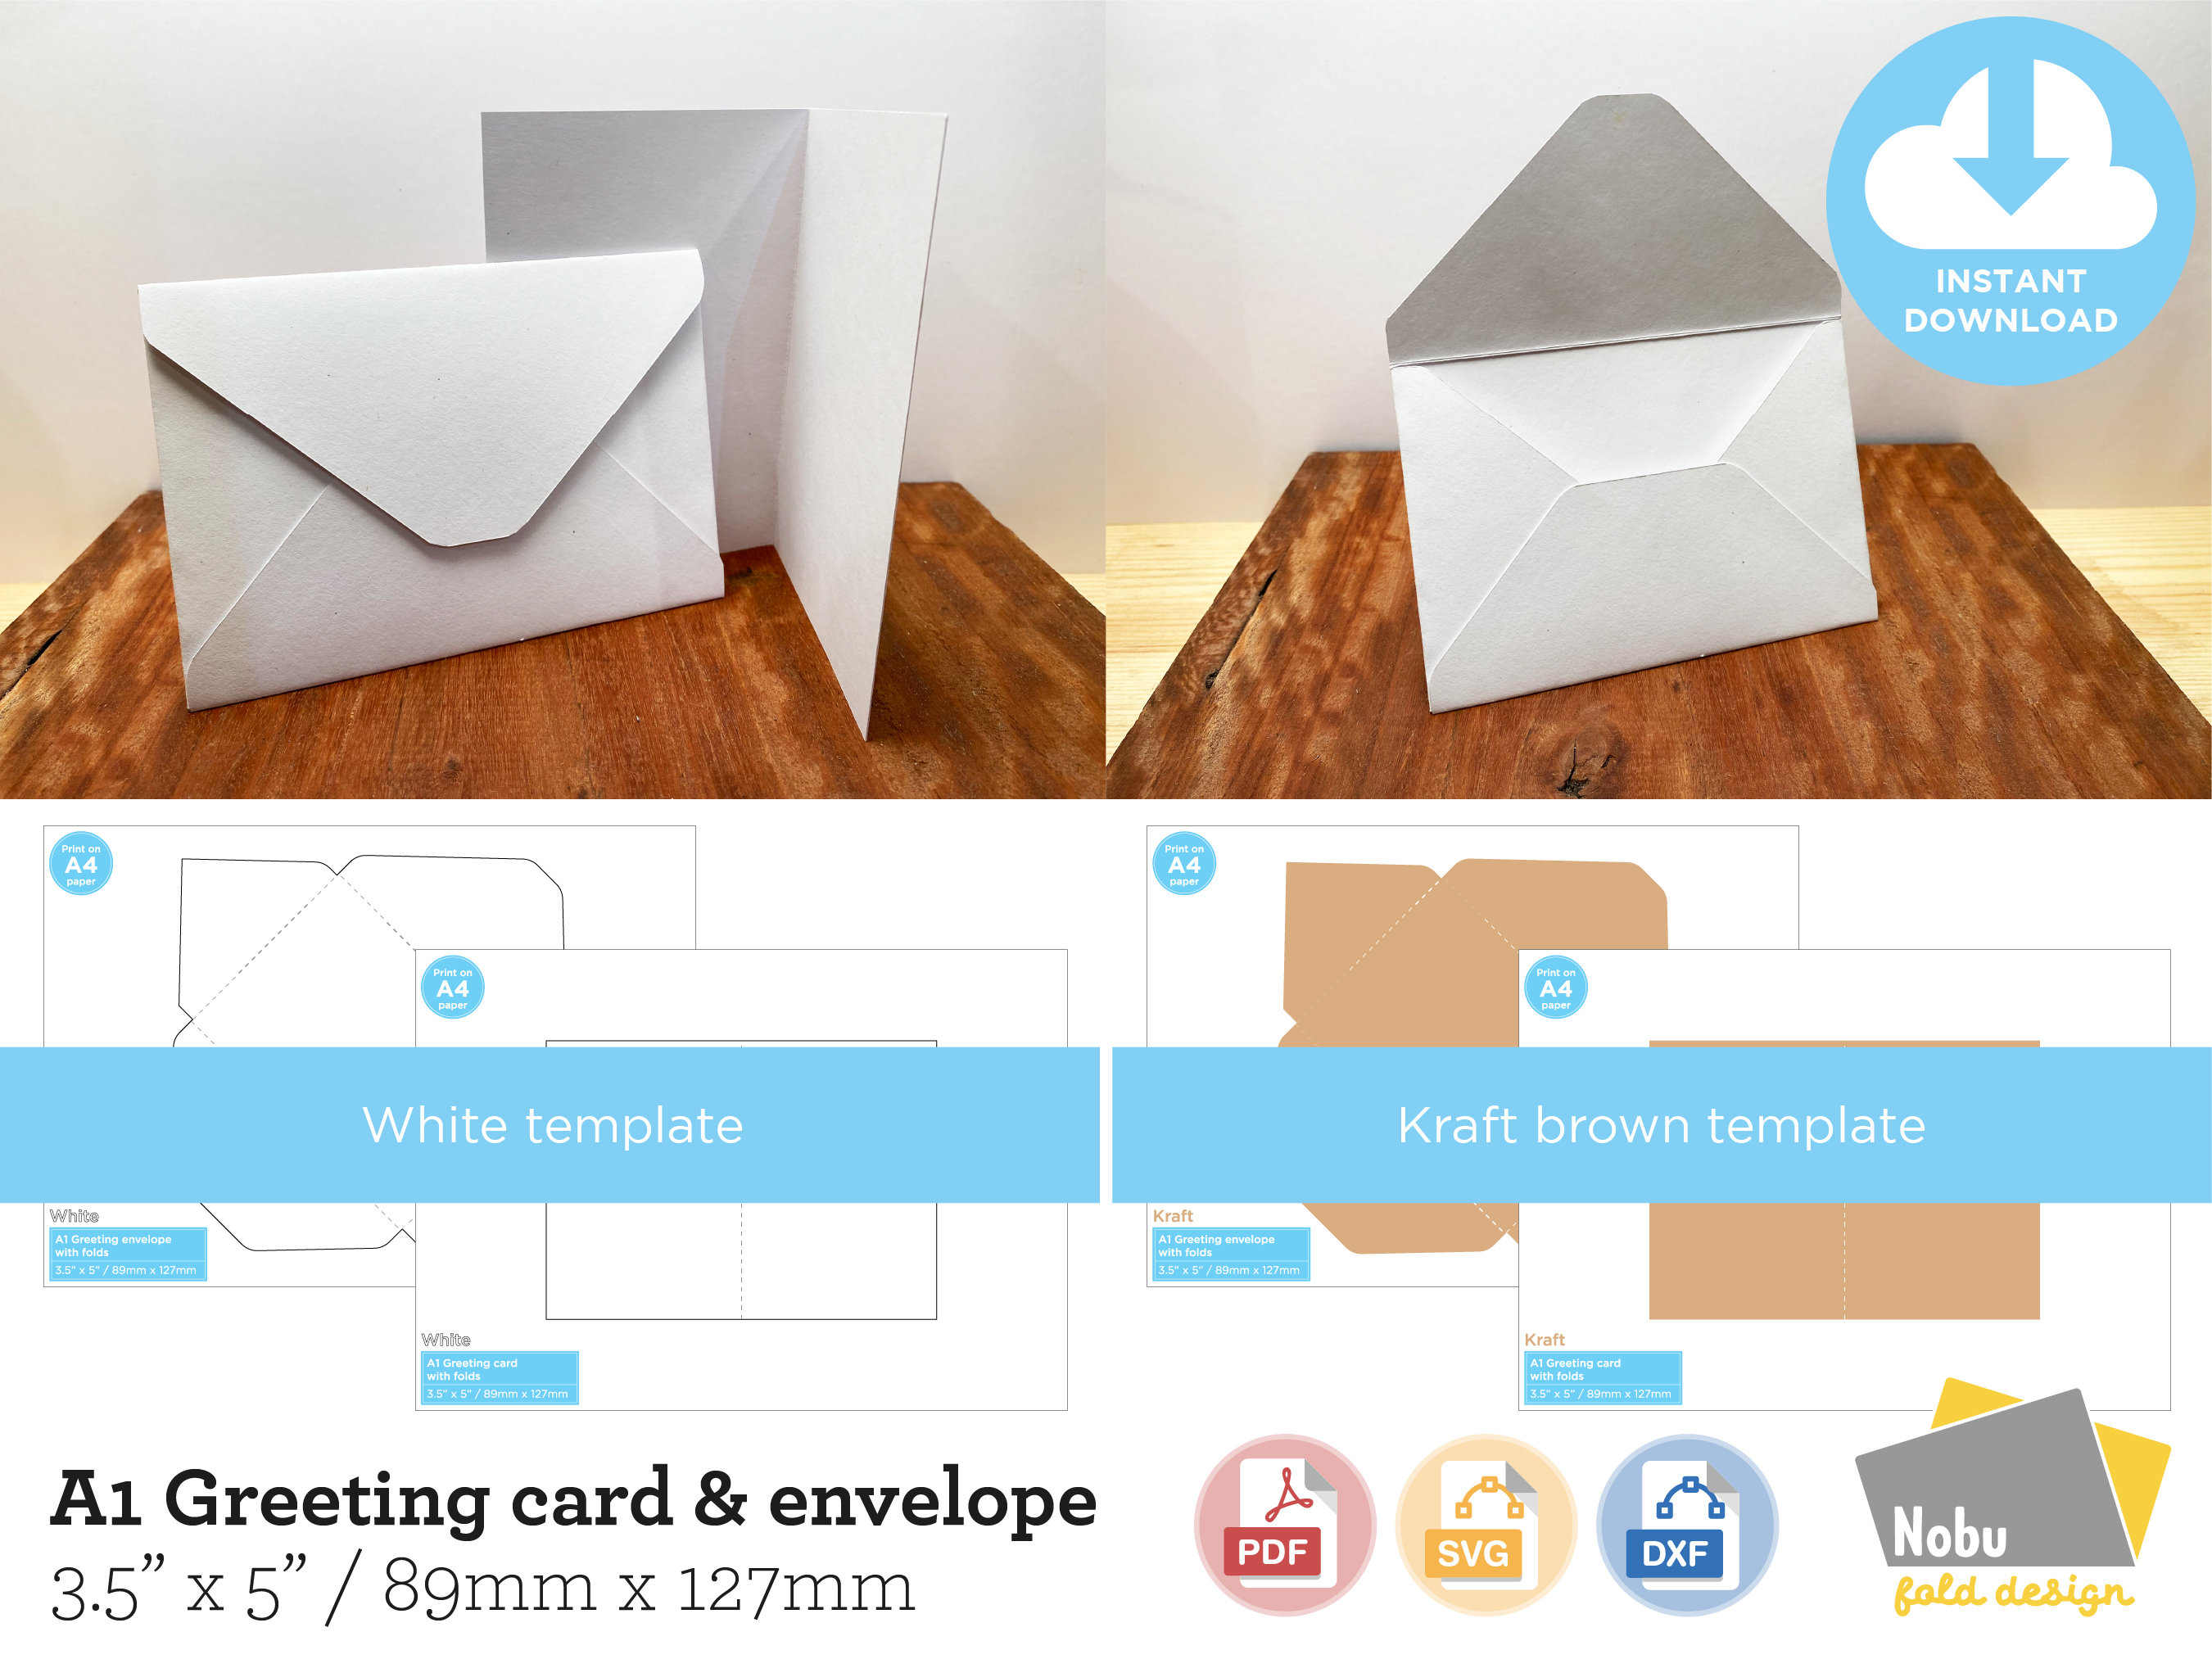 A1 Greeting Card & Envelope Template 3.5 x 5 / 89mm x 127mm Etsy